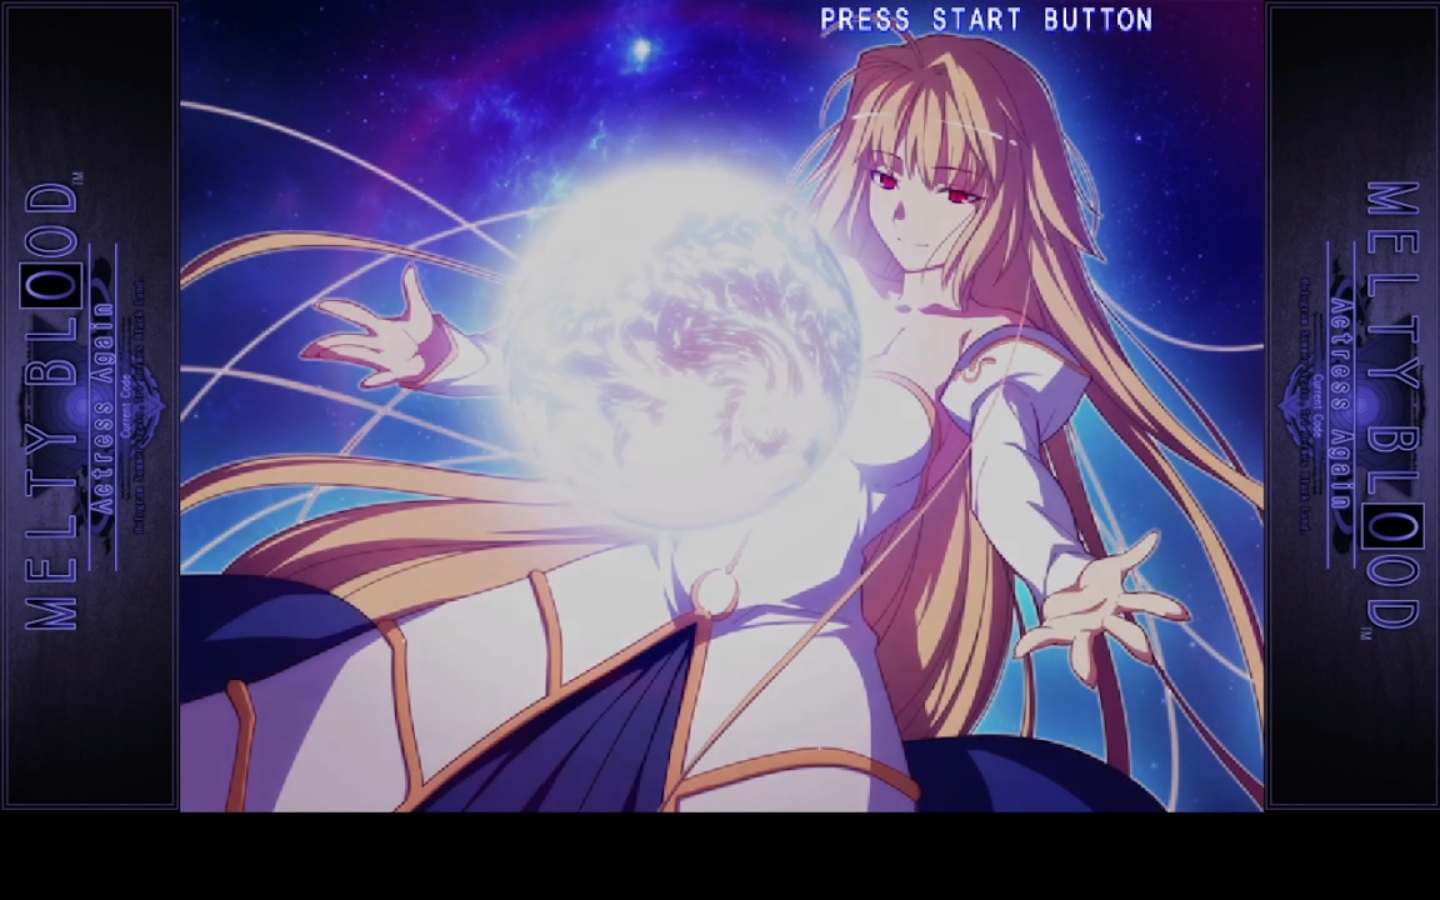 MELTY BLOOD Actress Again Current Code.Story Archetype Earth